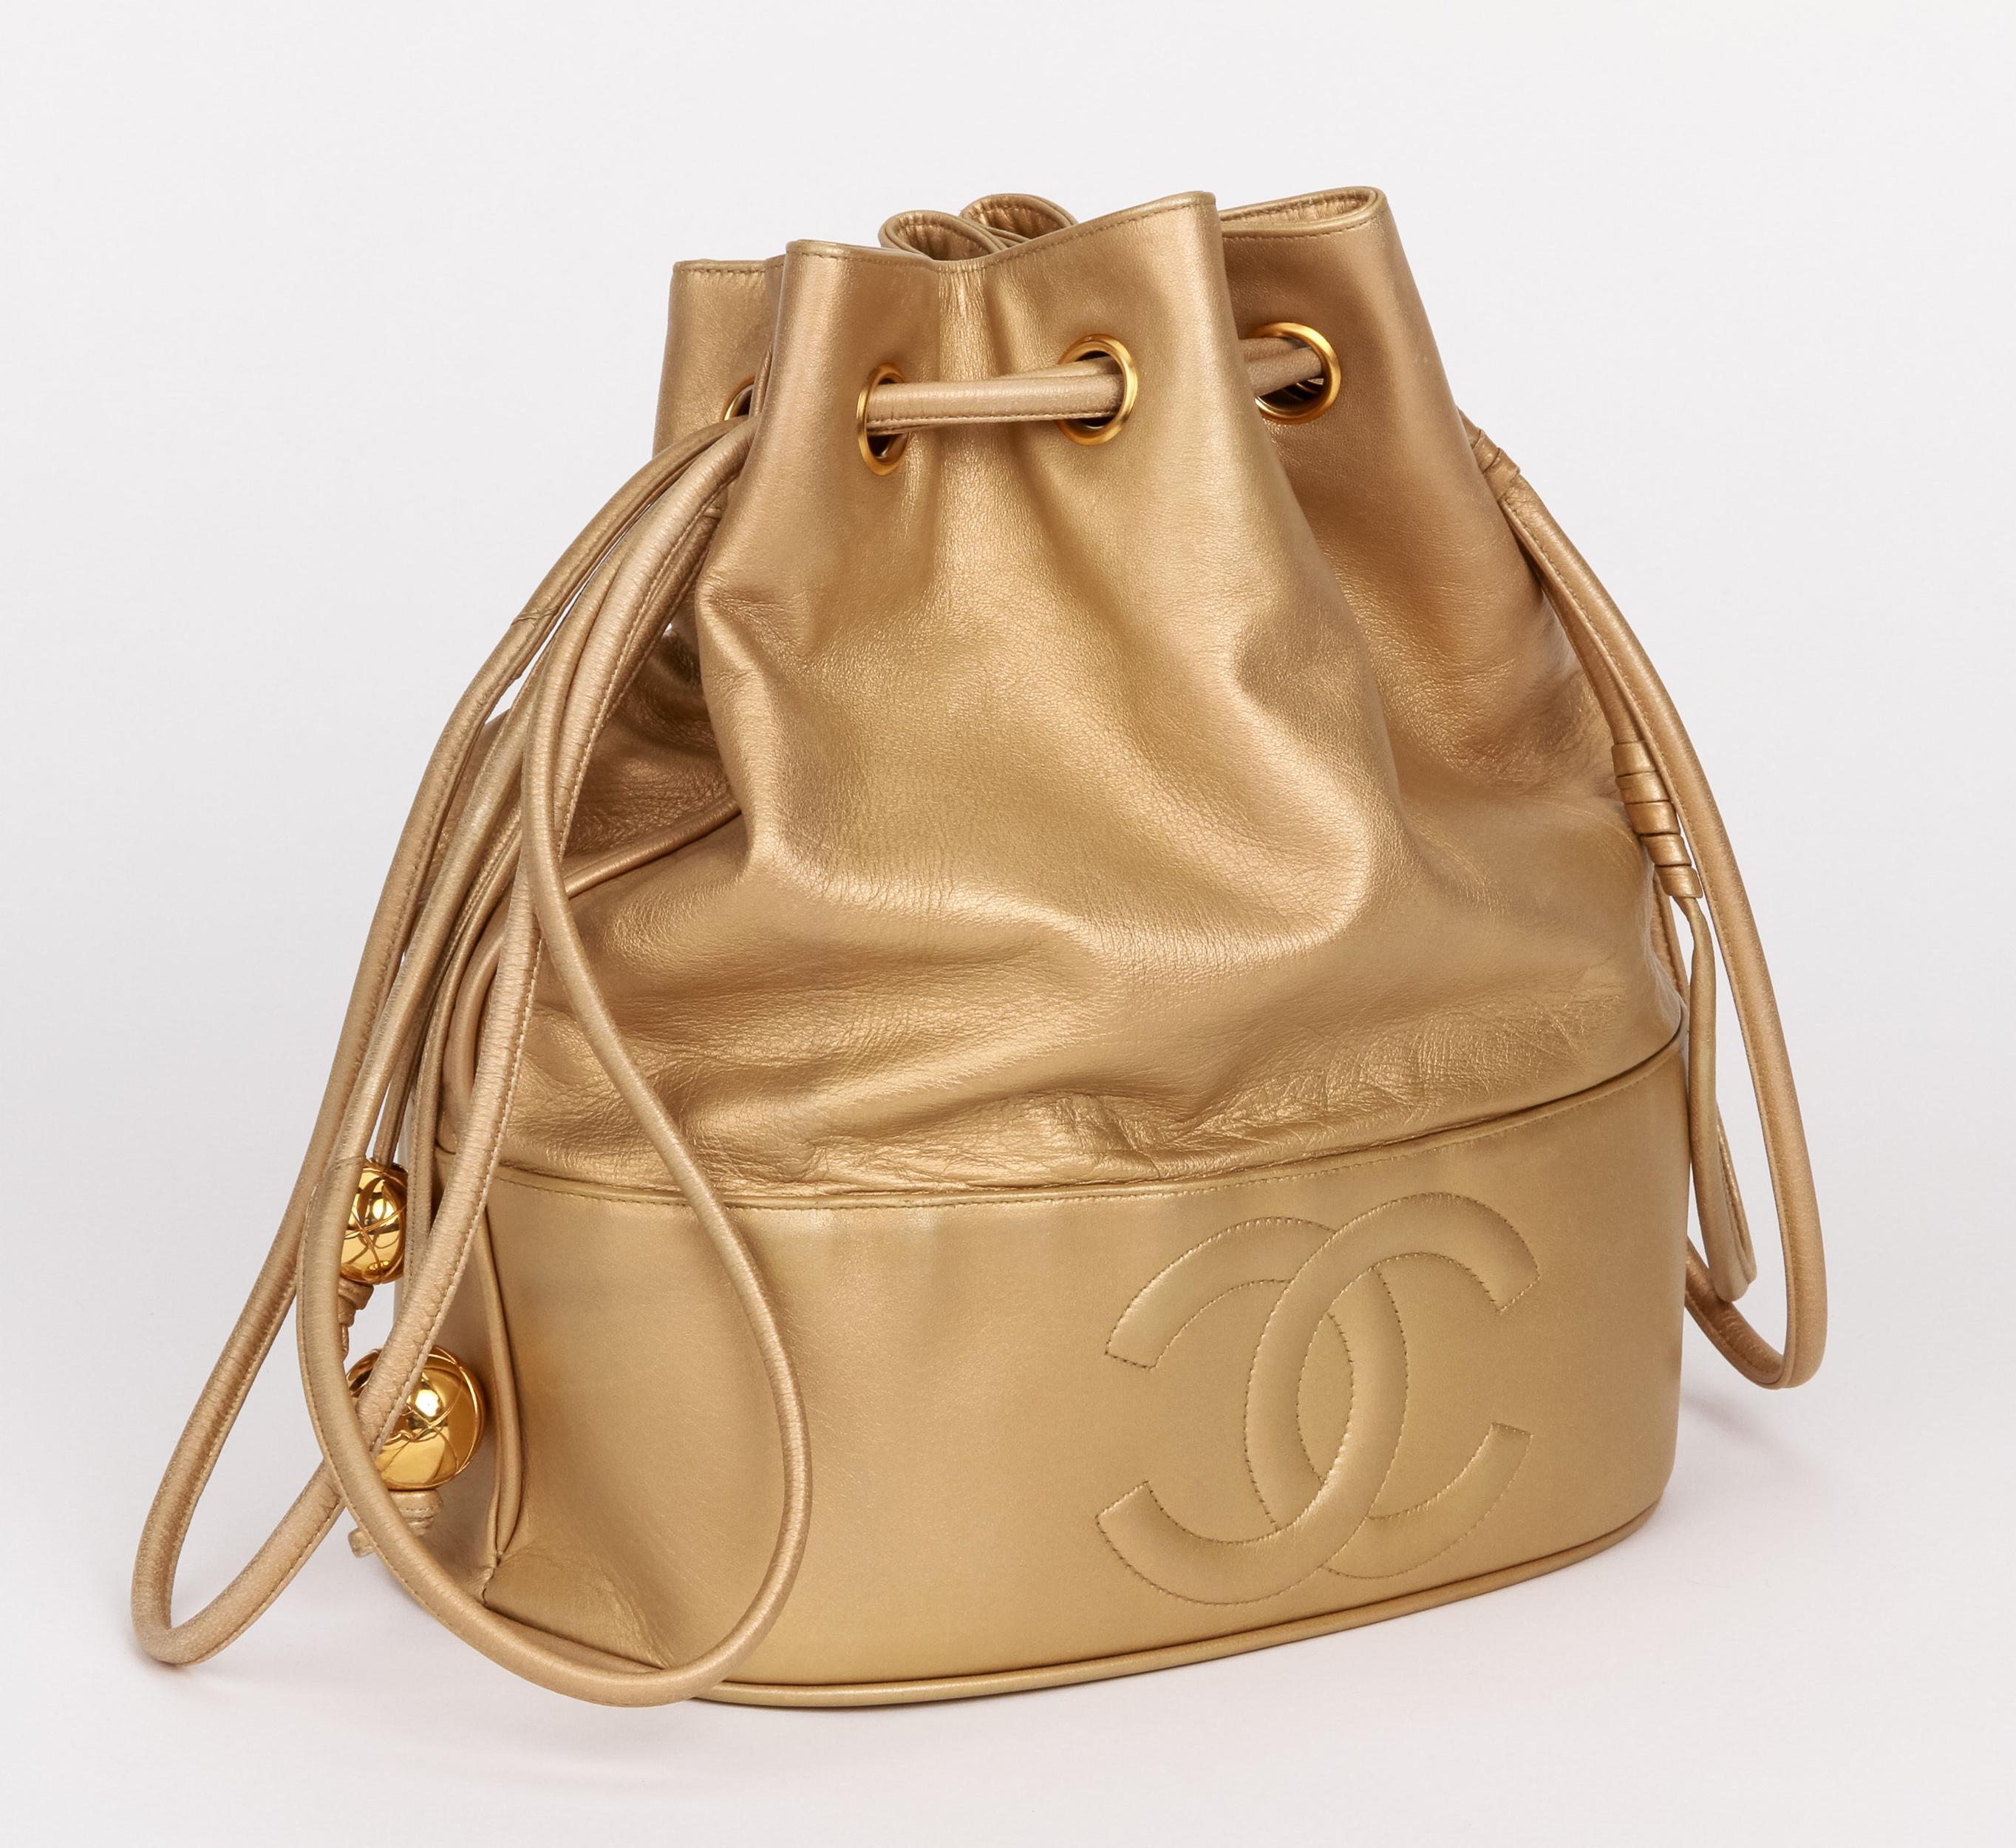 Chanel rare and collectible large 90s bucket bag. Excellent condition except one minor stain, please refer to photos. Collection 1991. Shoulder strap 18